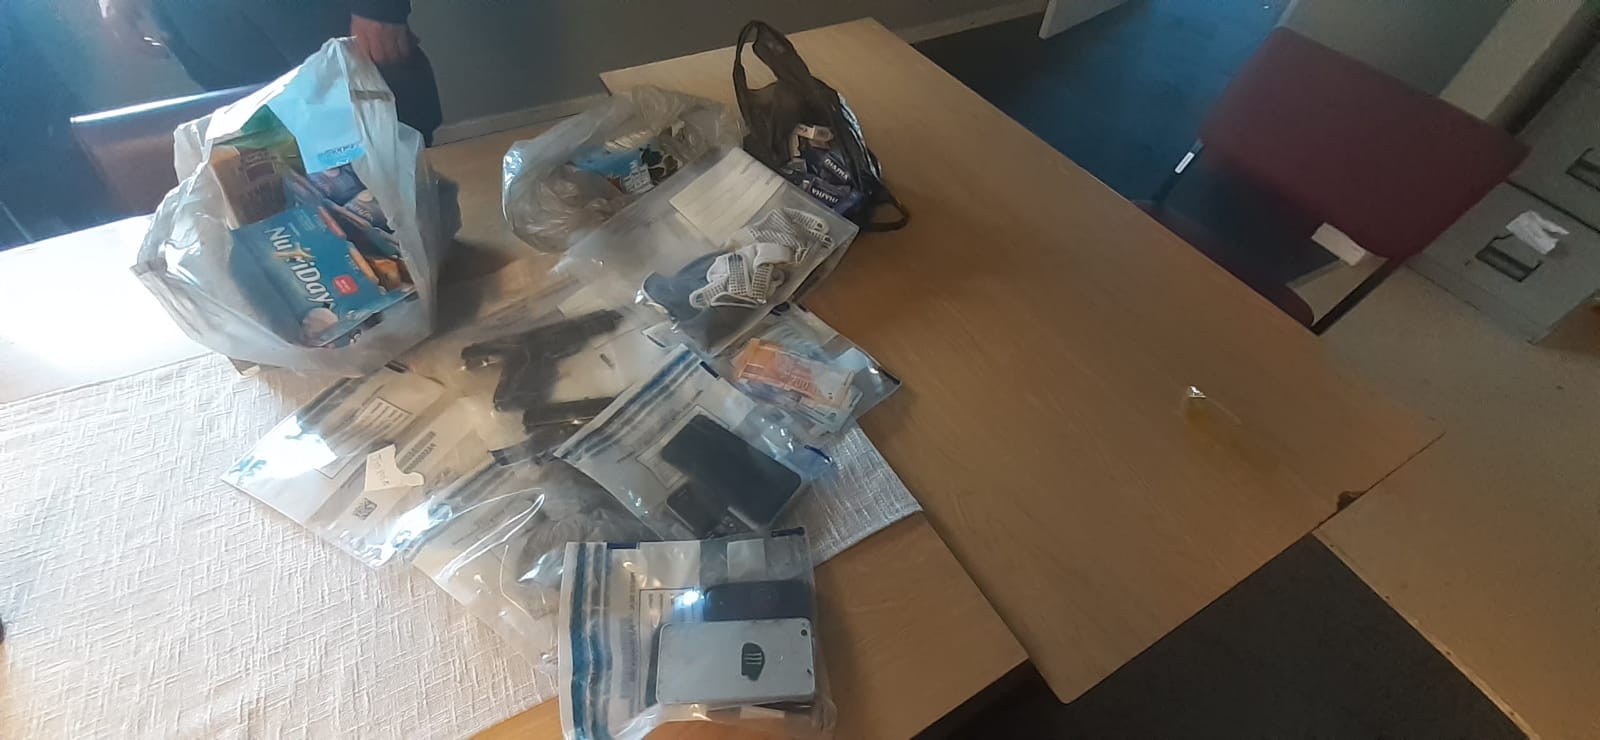 Partnership policing leads to arrests and the recovery of stolen property following a business robbery